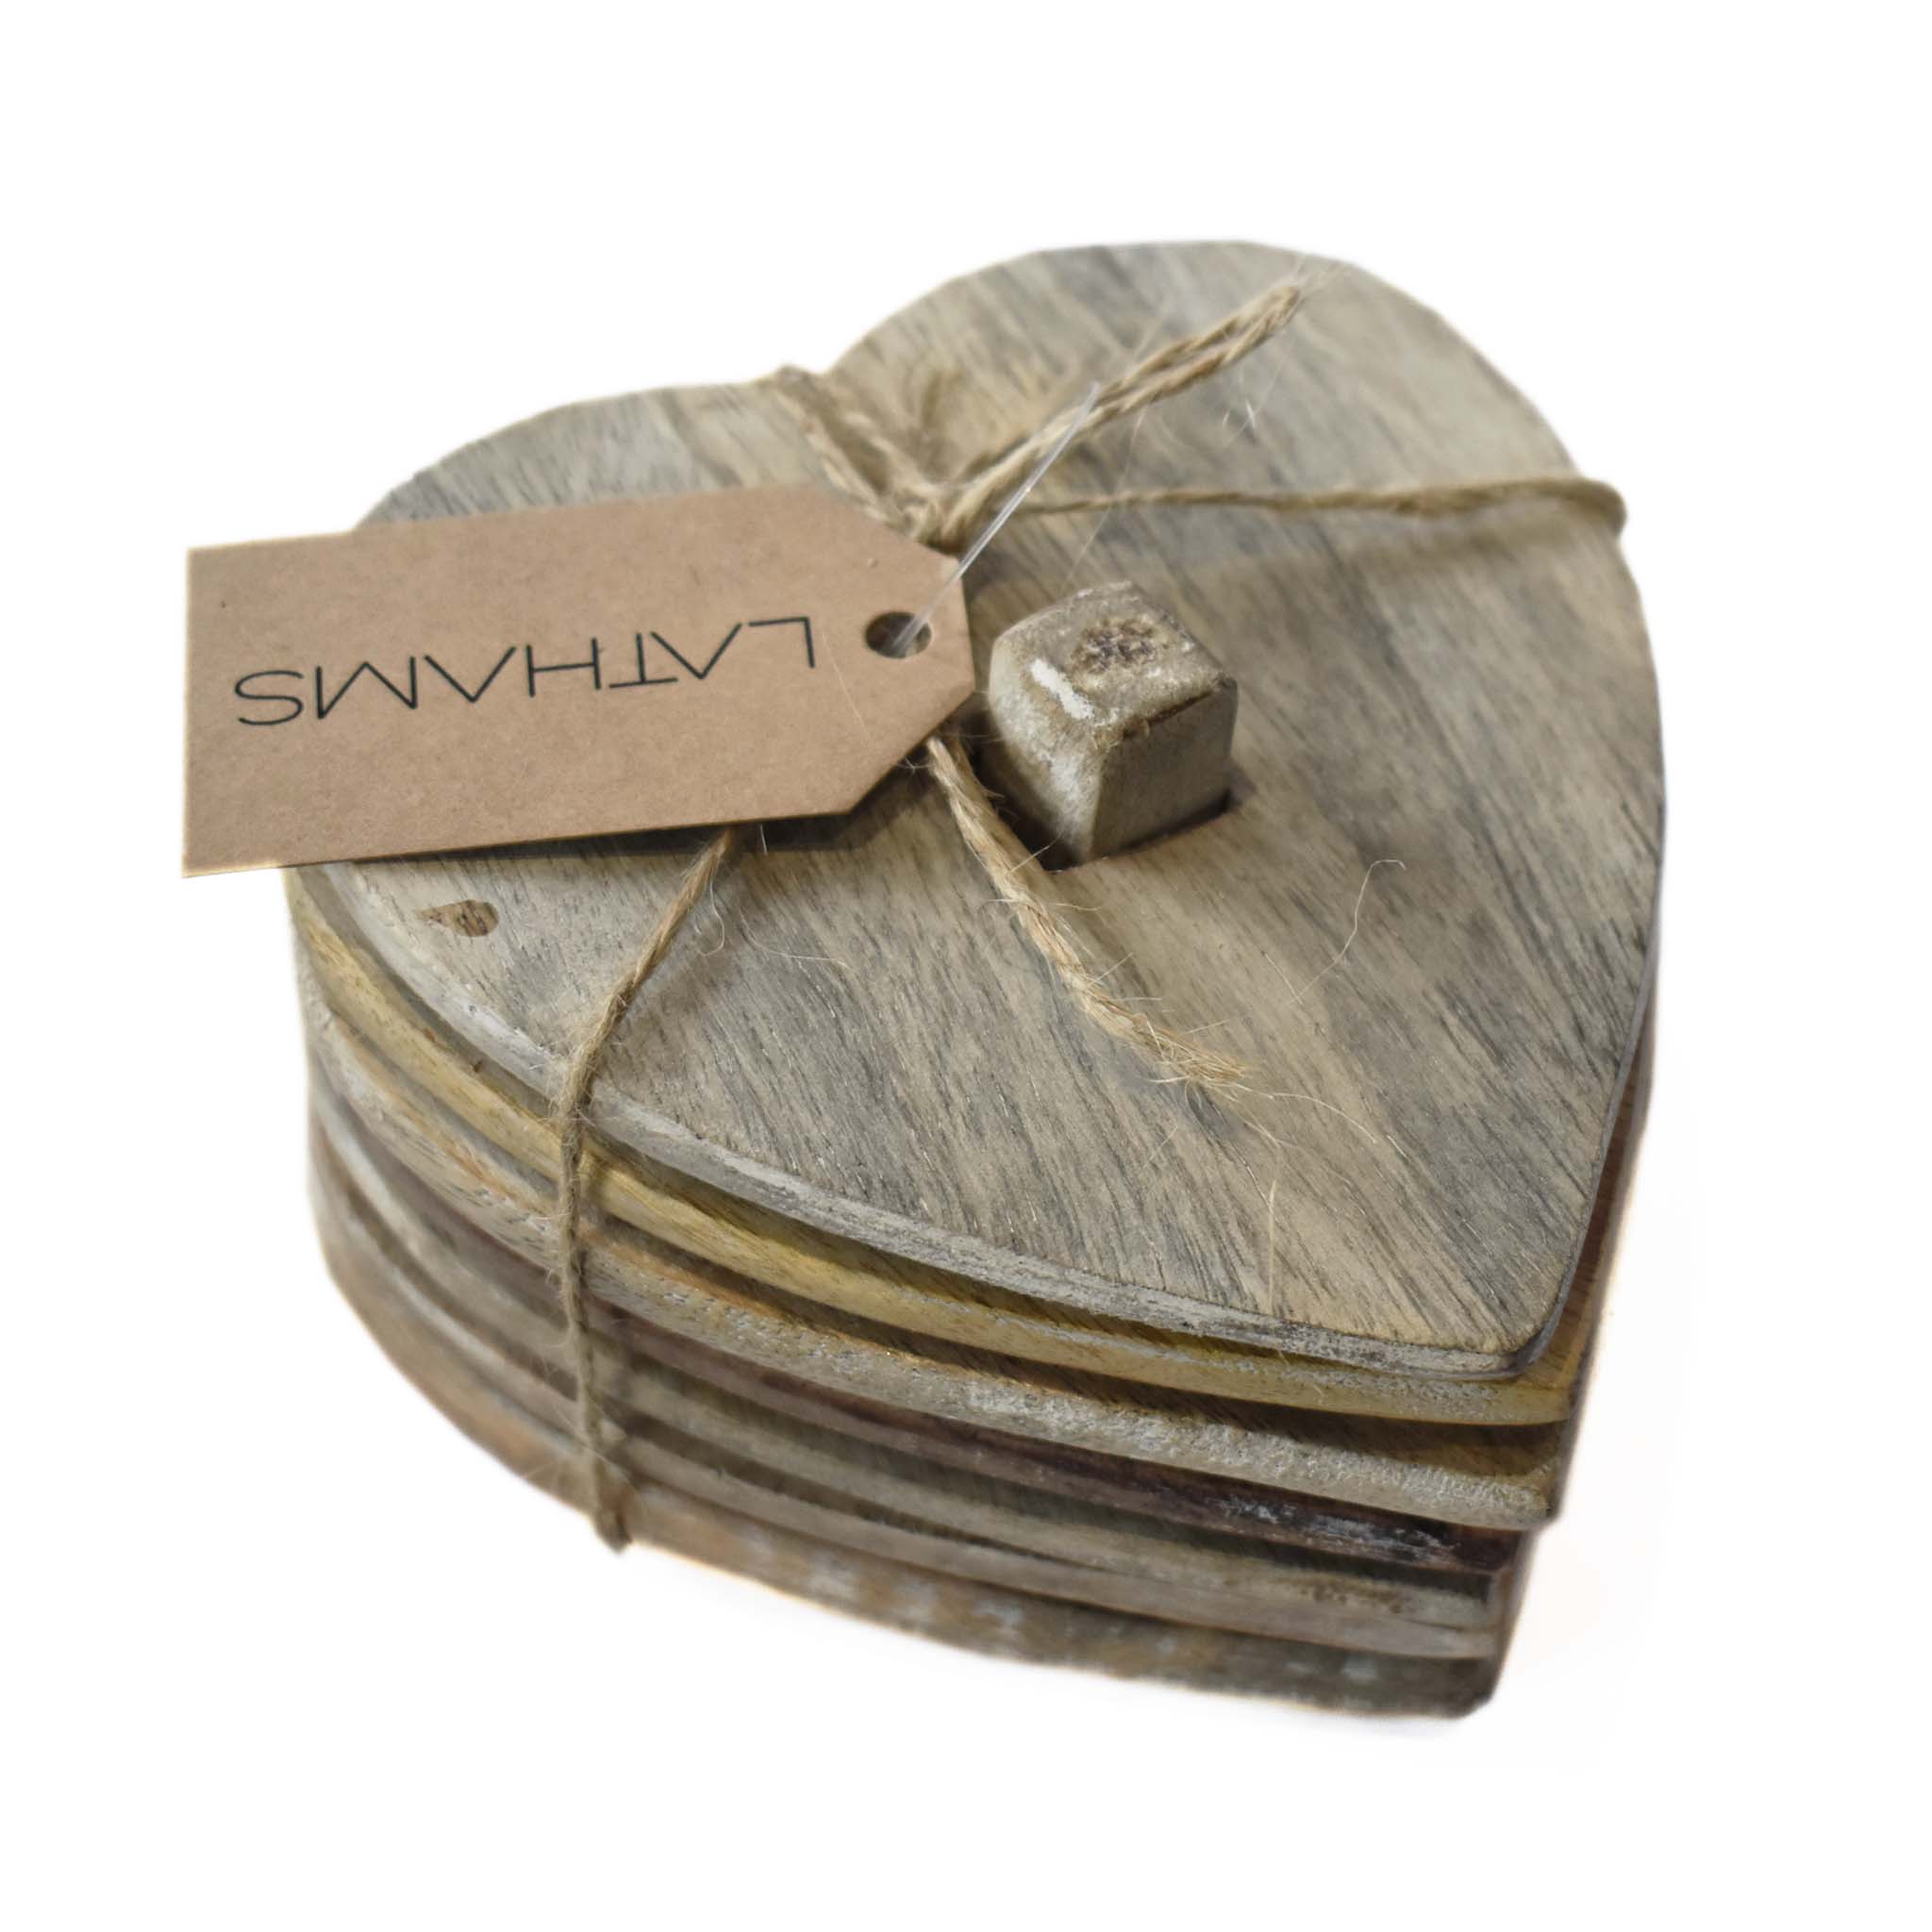 WOODEN HEART COASTERS